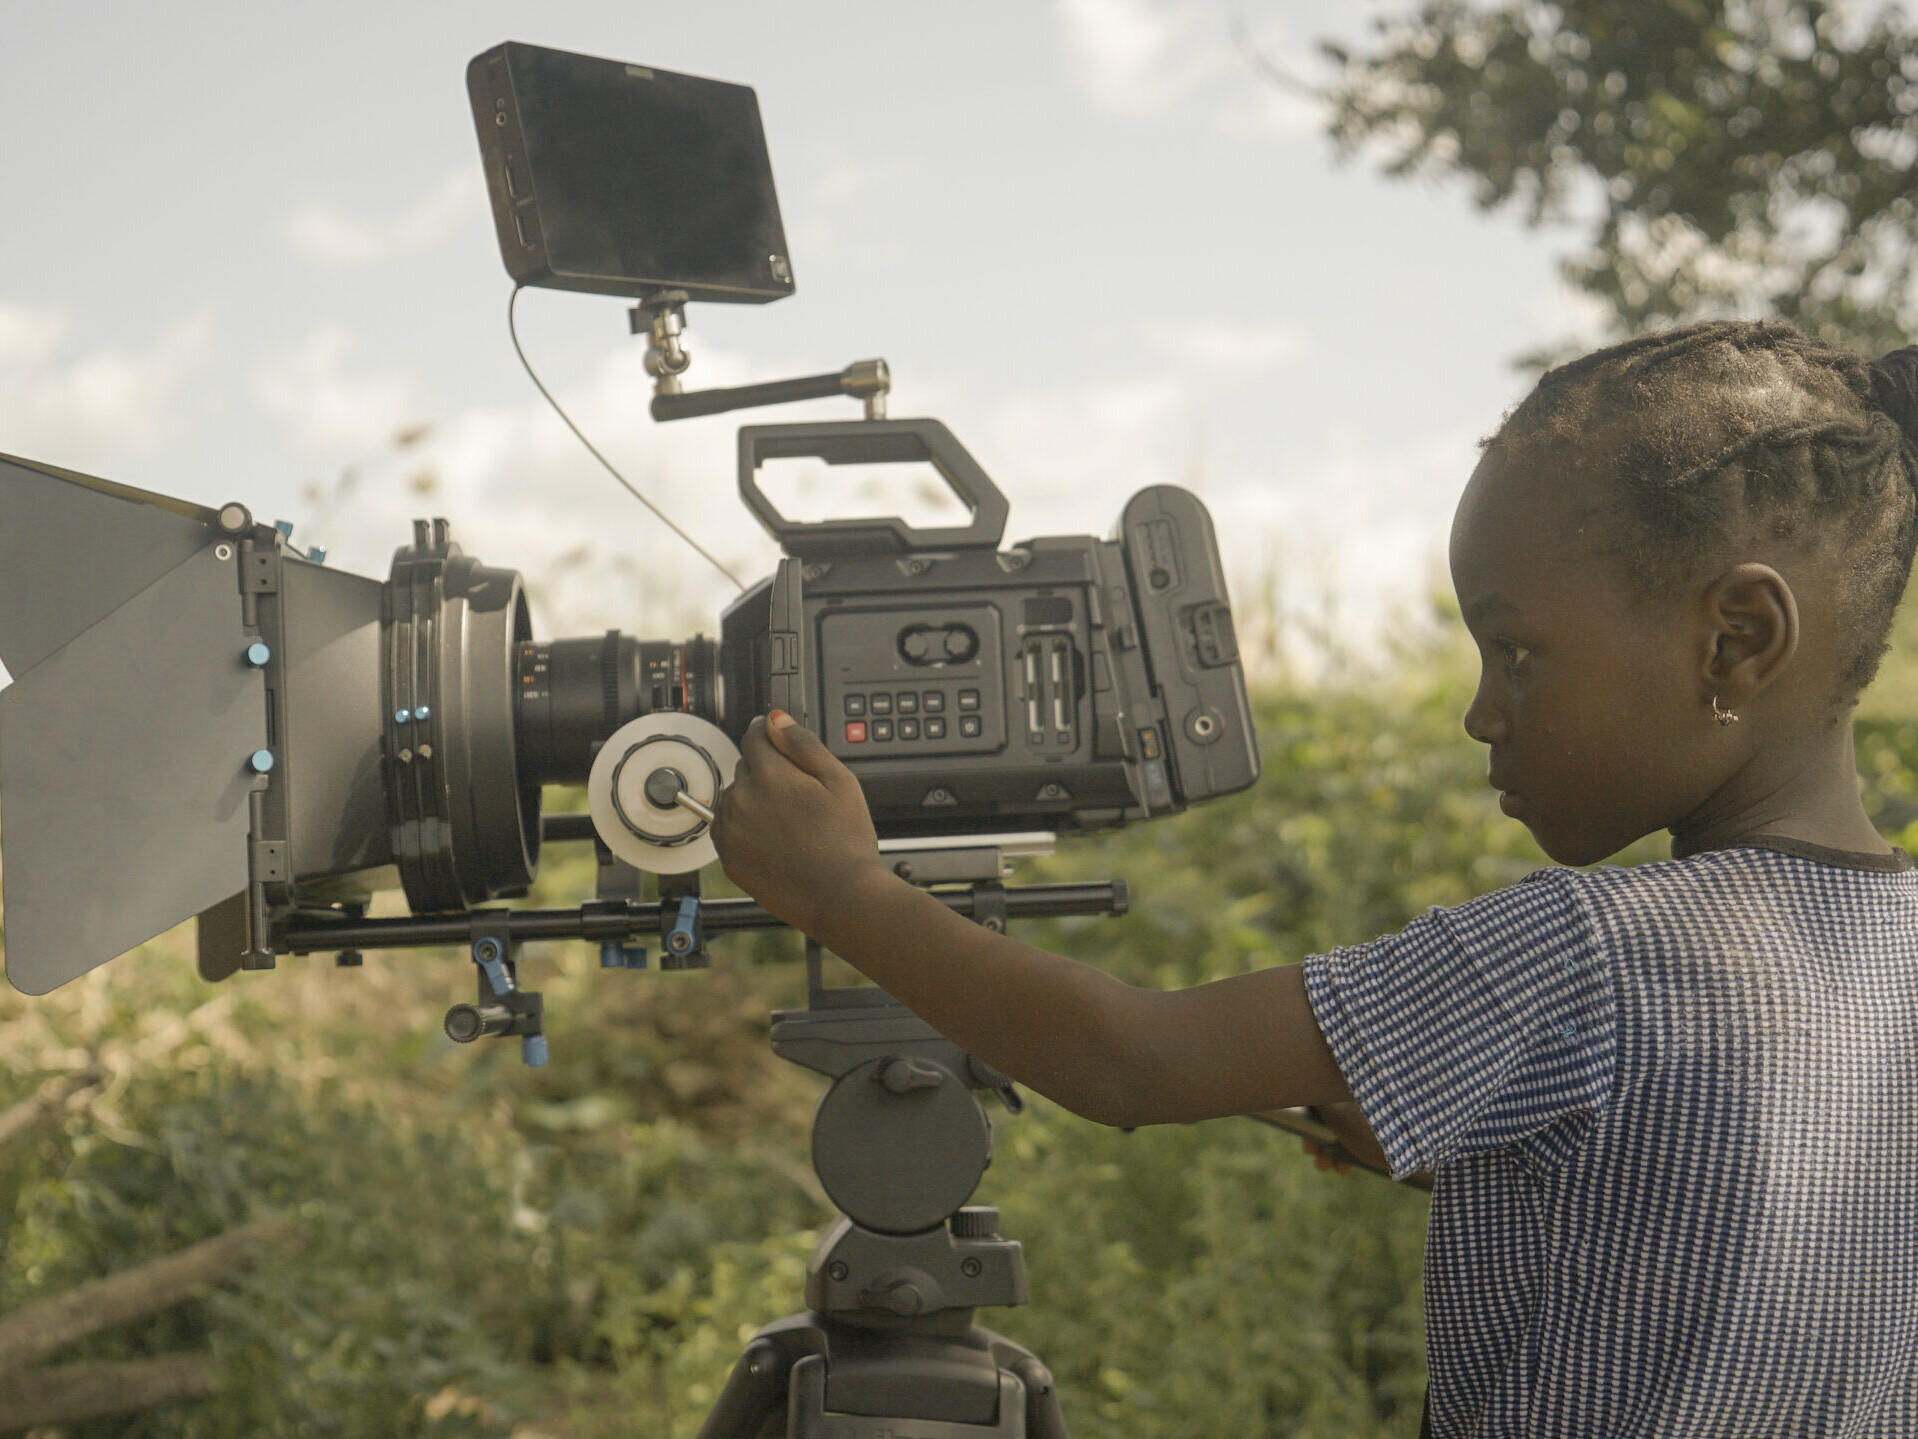 A young girl in profile is operating a camera.